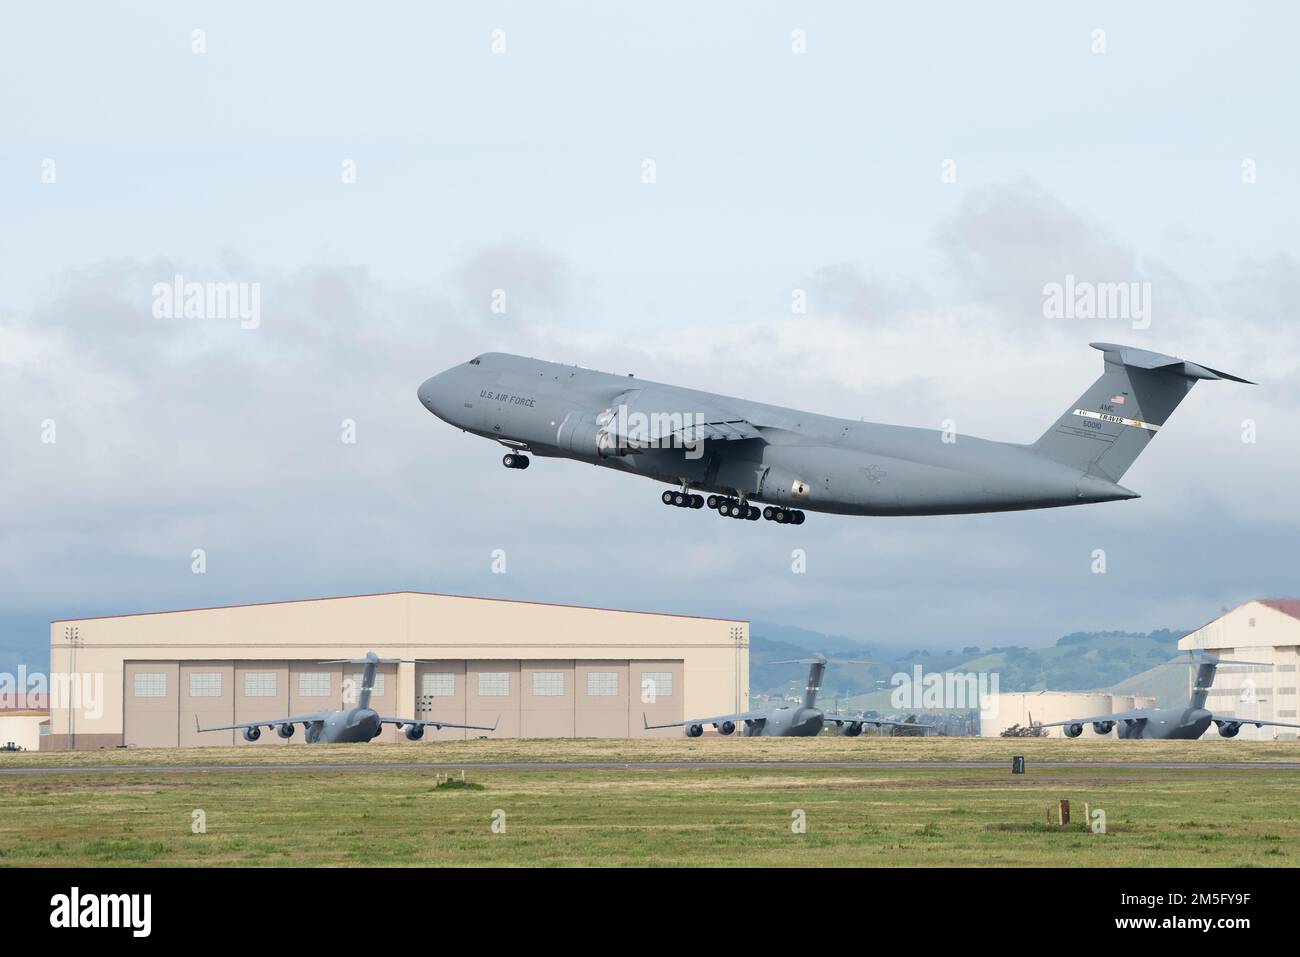 Air Force C-5M Super Galaxy Upgrade Done, Will Stay in Air Until 2040s